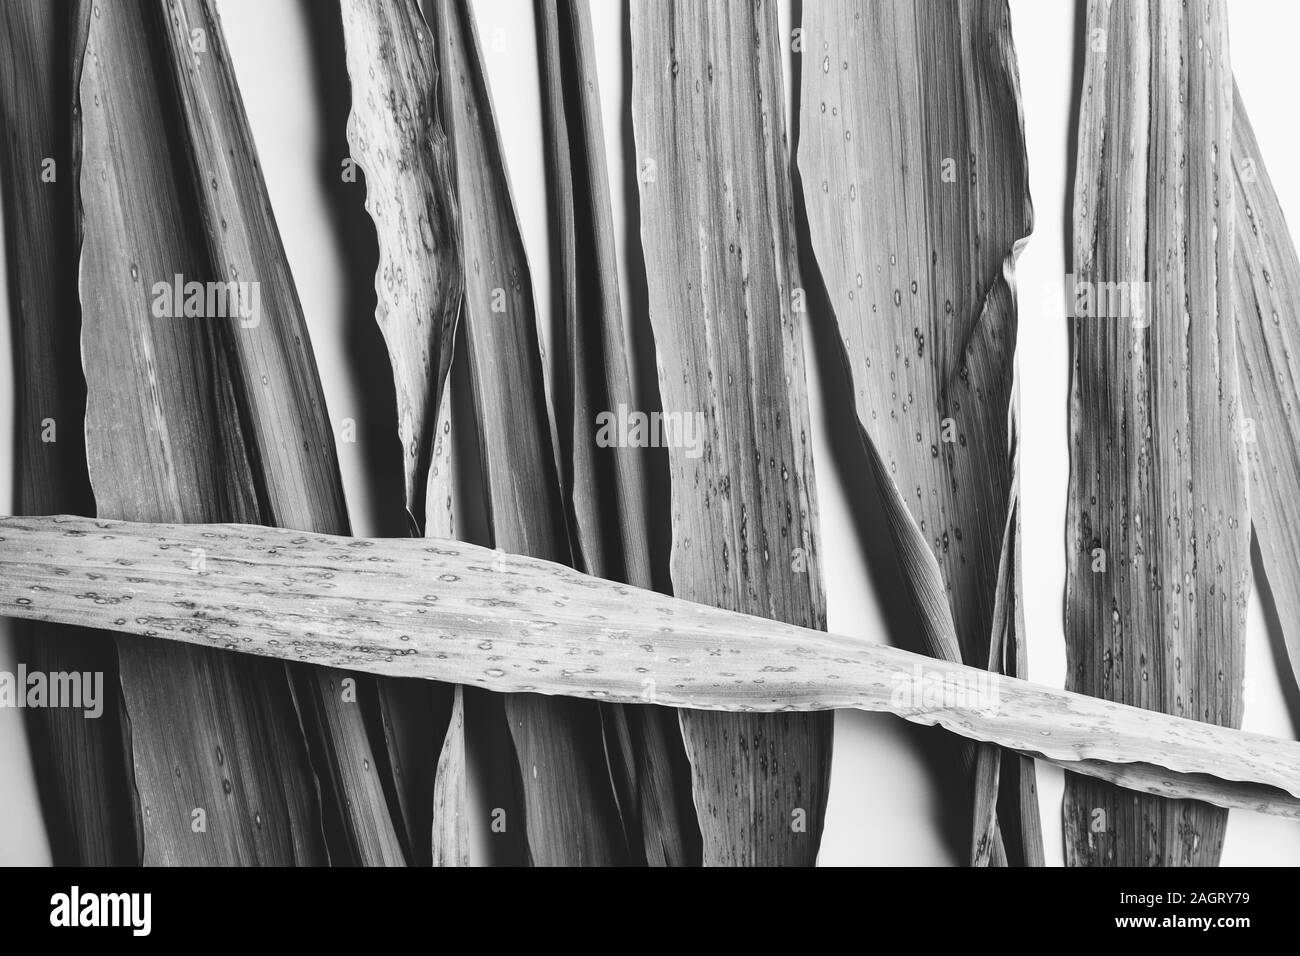 Black and white natural texture, close-up of bamboo leaves Stock Photo